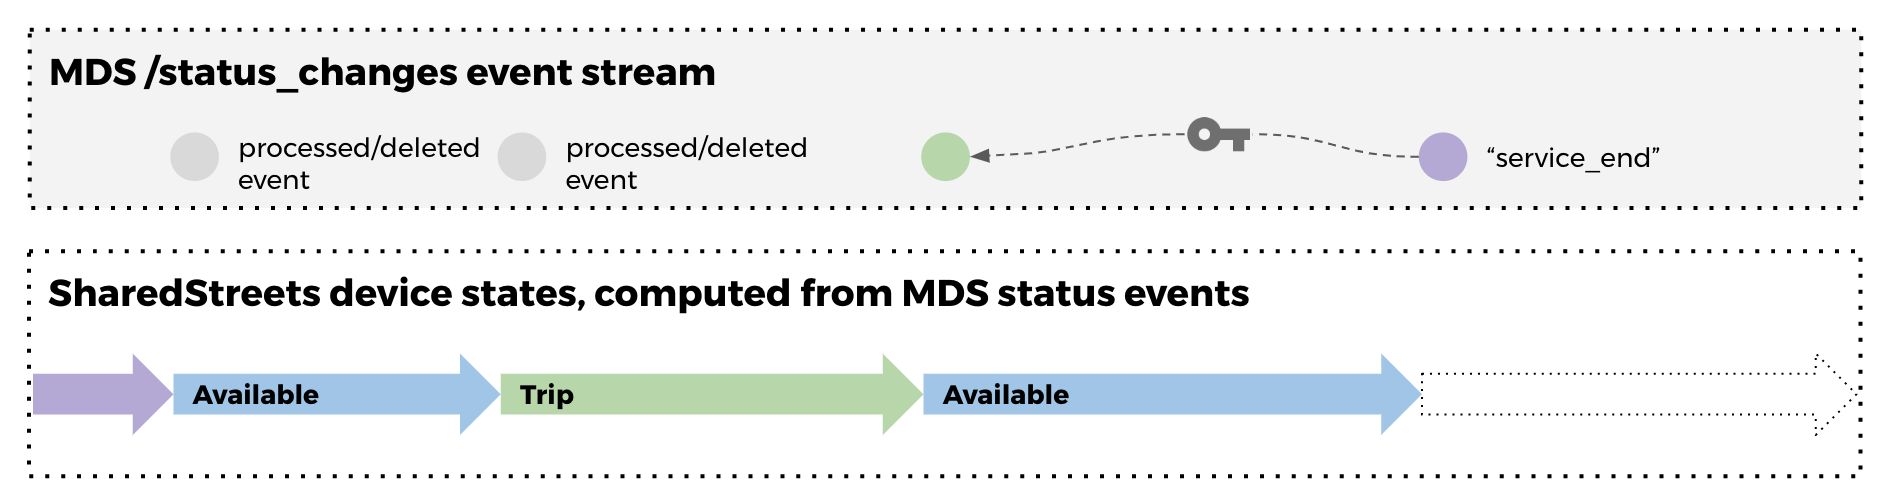 MDS events to device states